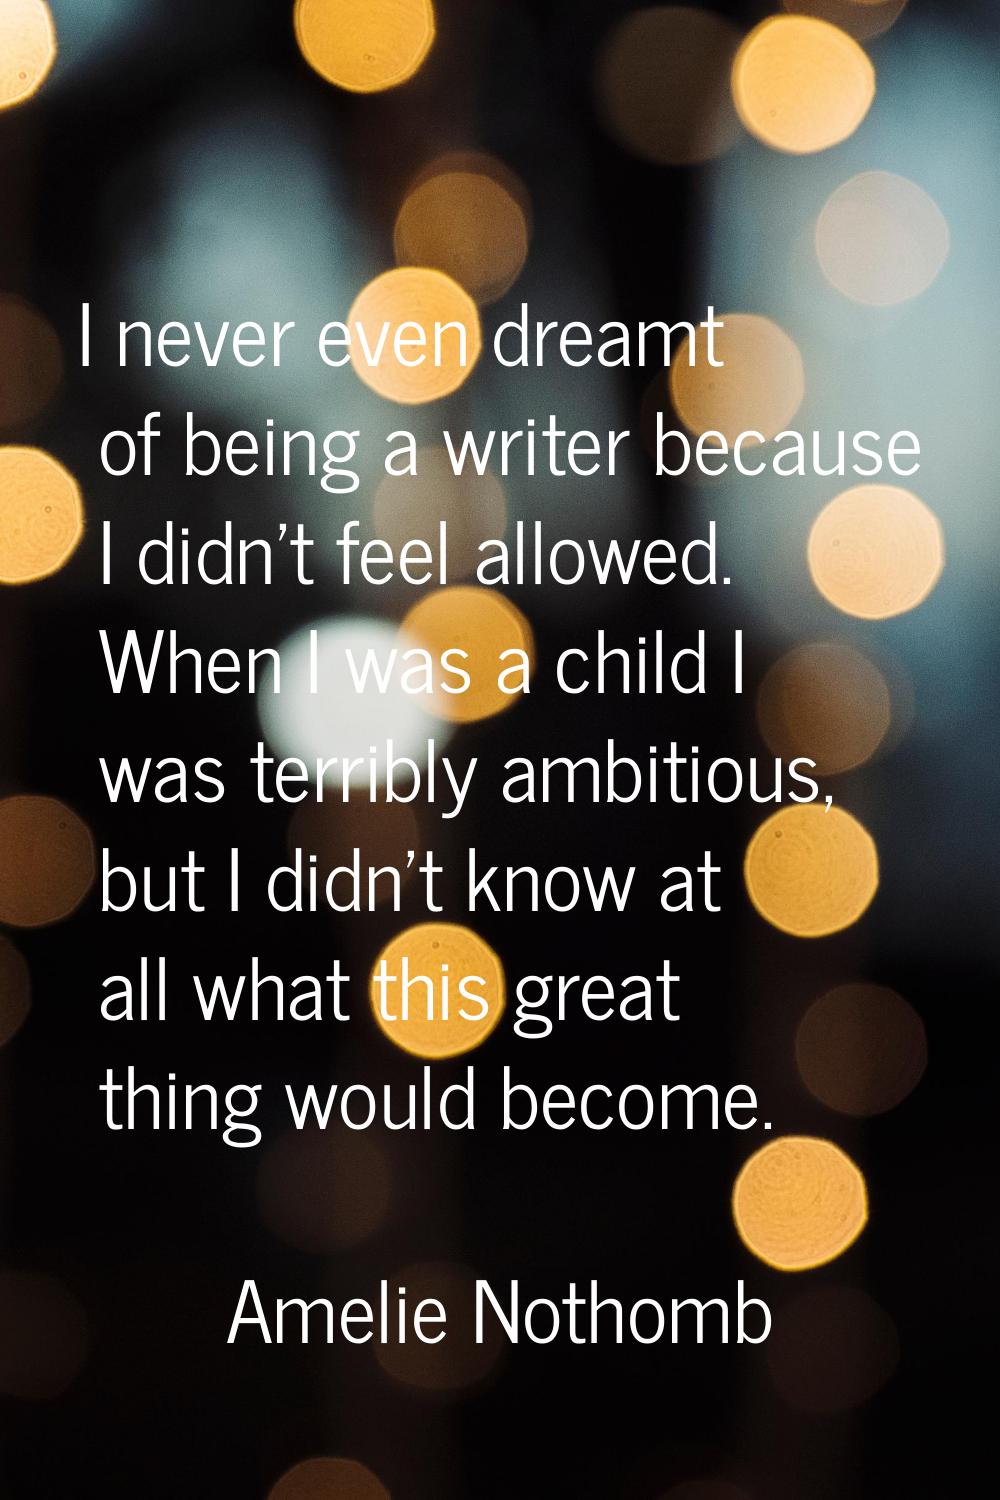 I never even dreamt of being a writer because I didn't feel allowed. When I was a child I was terri